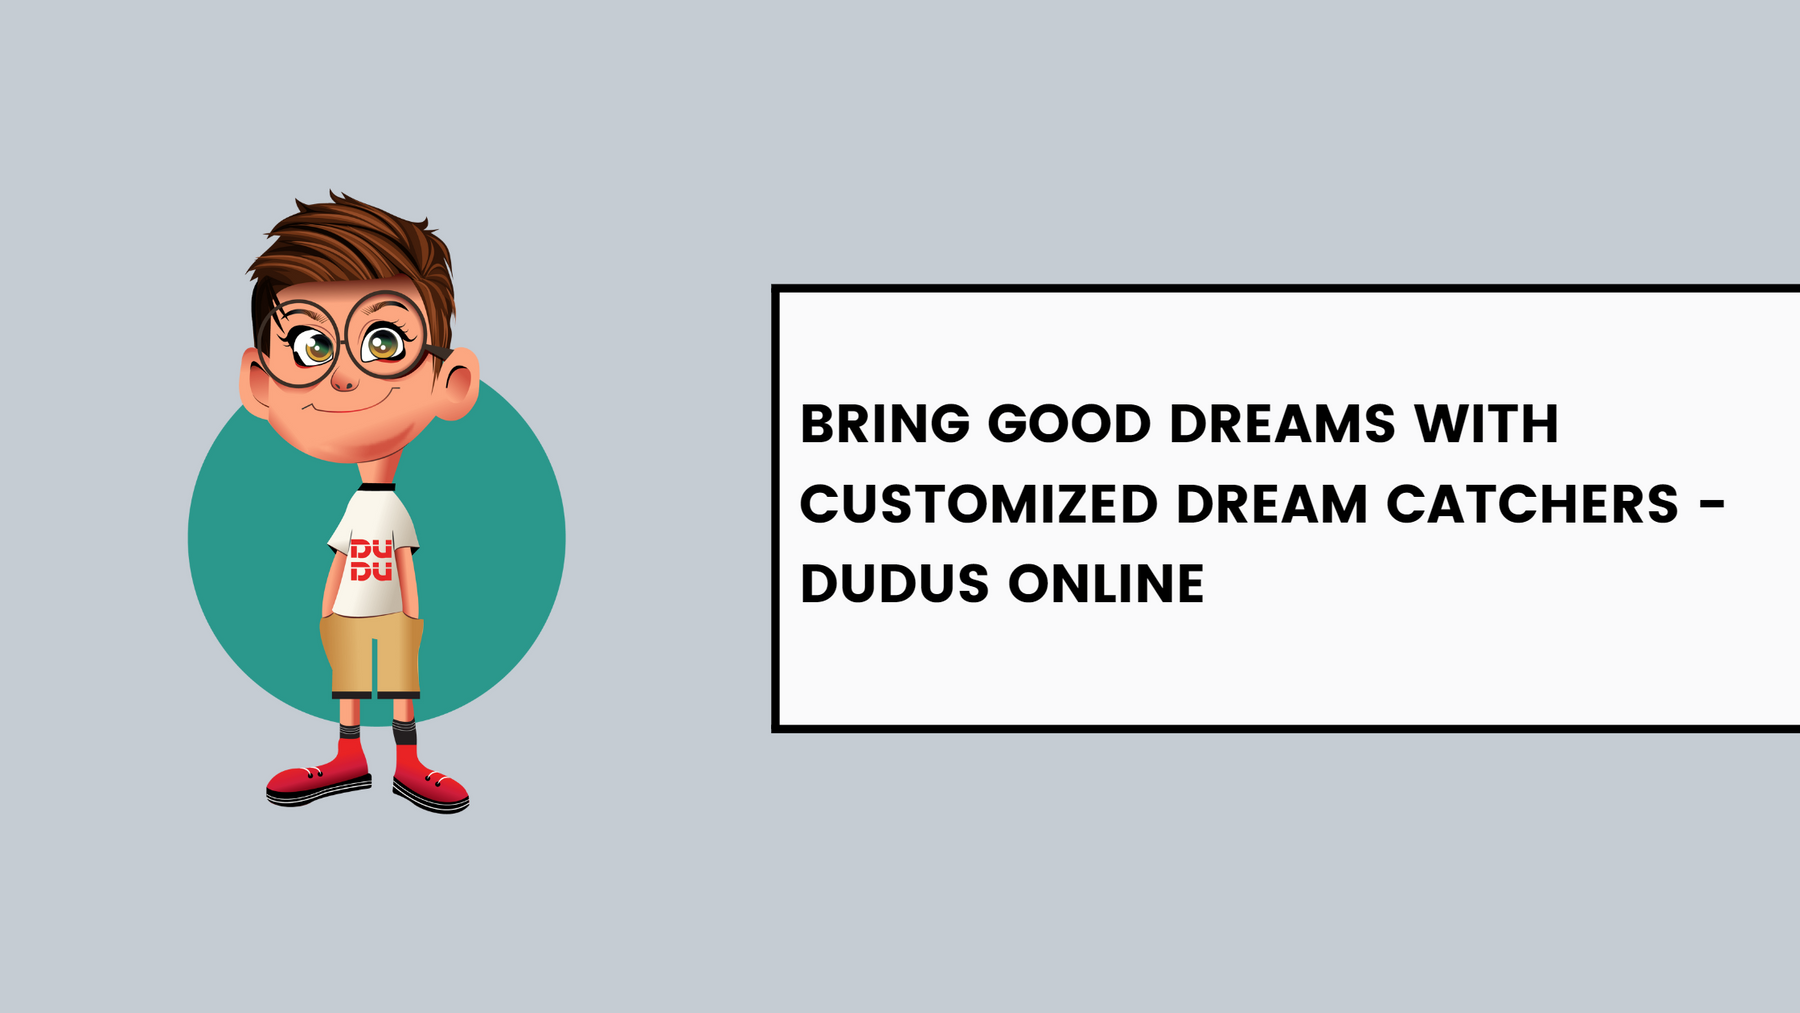 Bring Good Dreams with Customized Dream Catchers - Dudus Online